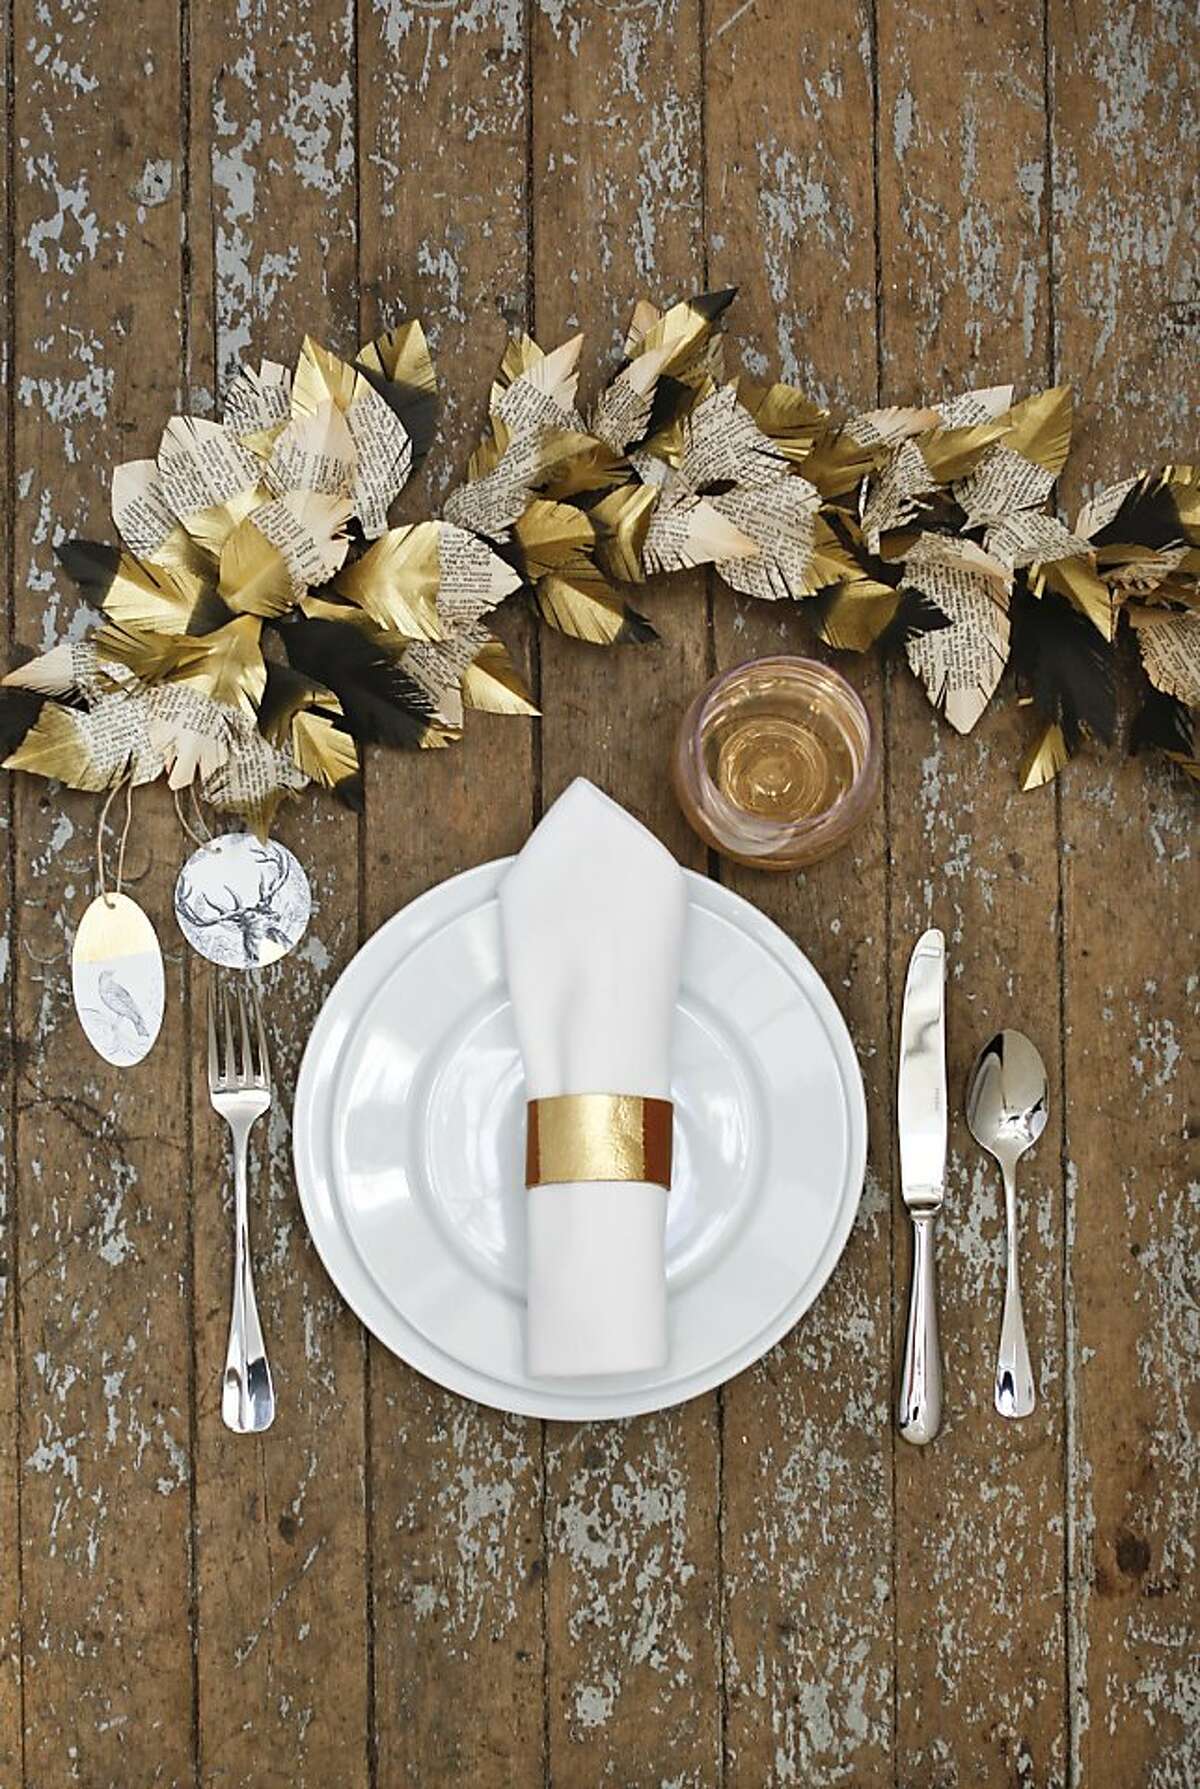 San Francisco Creativebug offers online videos on a variety of crafts. Instructor Courtney Cerruti shares three projects to add give your holiday home a DIY touch. To start, click through the photos for step-by-step instructions to create this elegant leaf and feather garland and leather napkin ring.